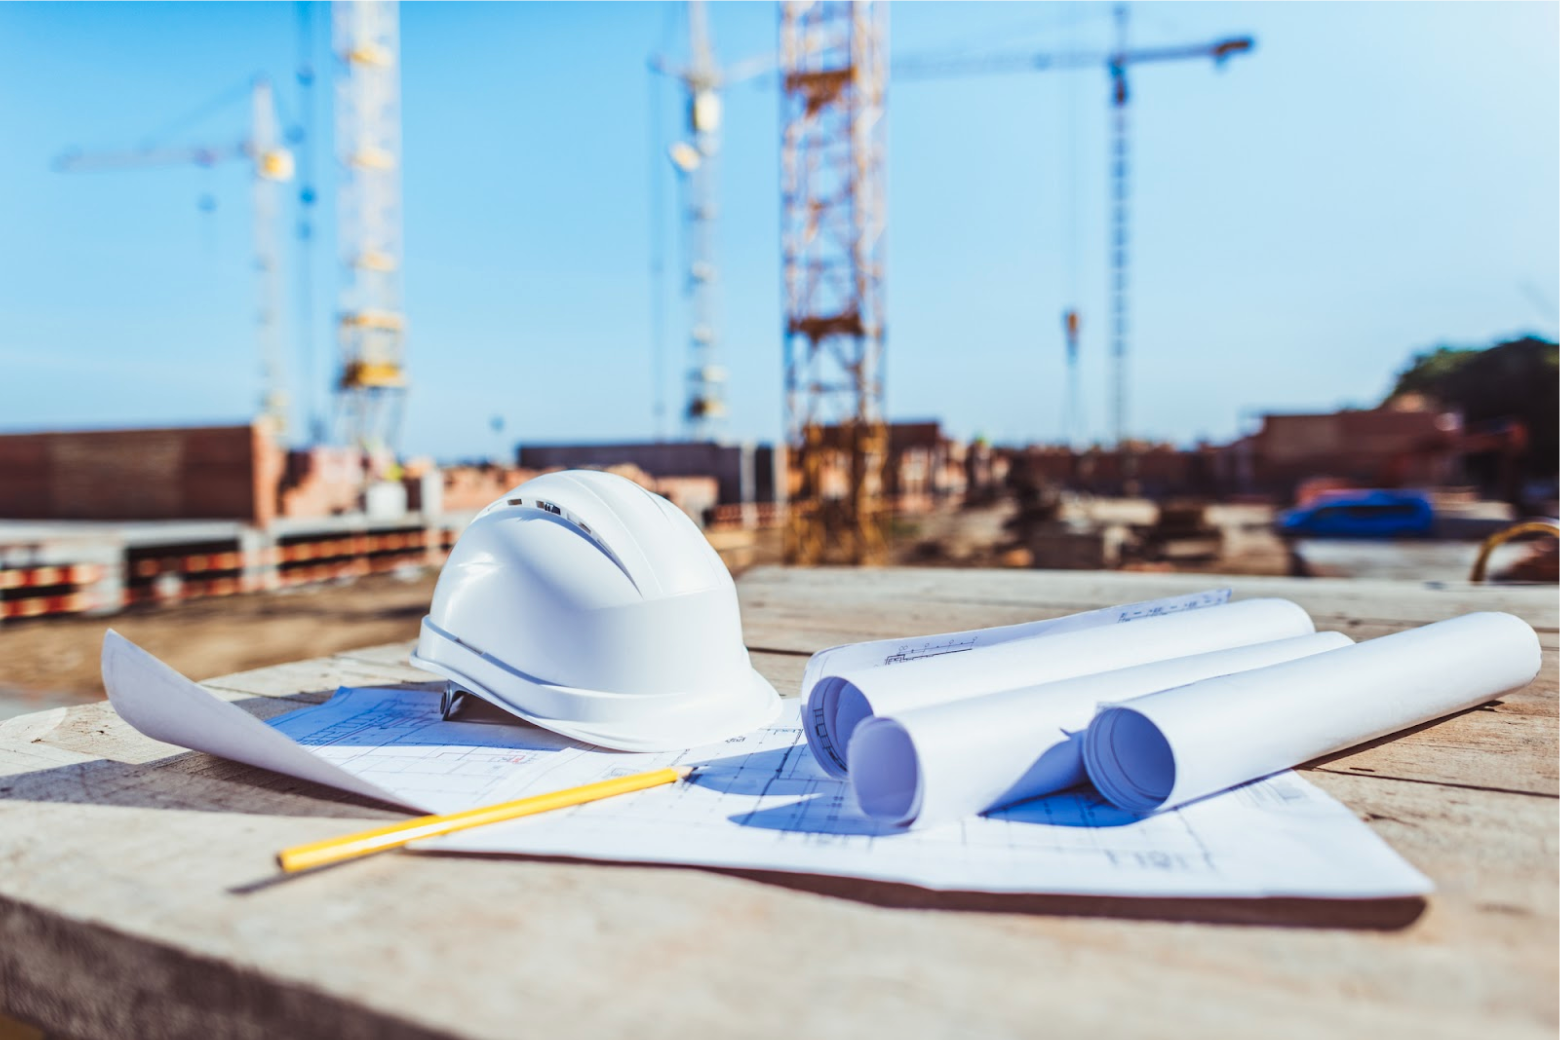 A white hardhat resting atop some blueprints, with three additional rolled-up blueprints to the side, and risers and cranes in a construction site visible in the background.